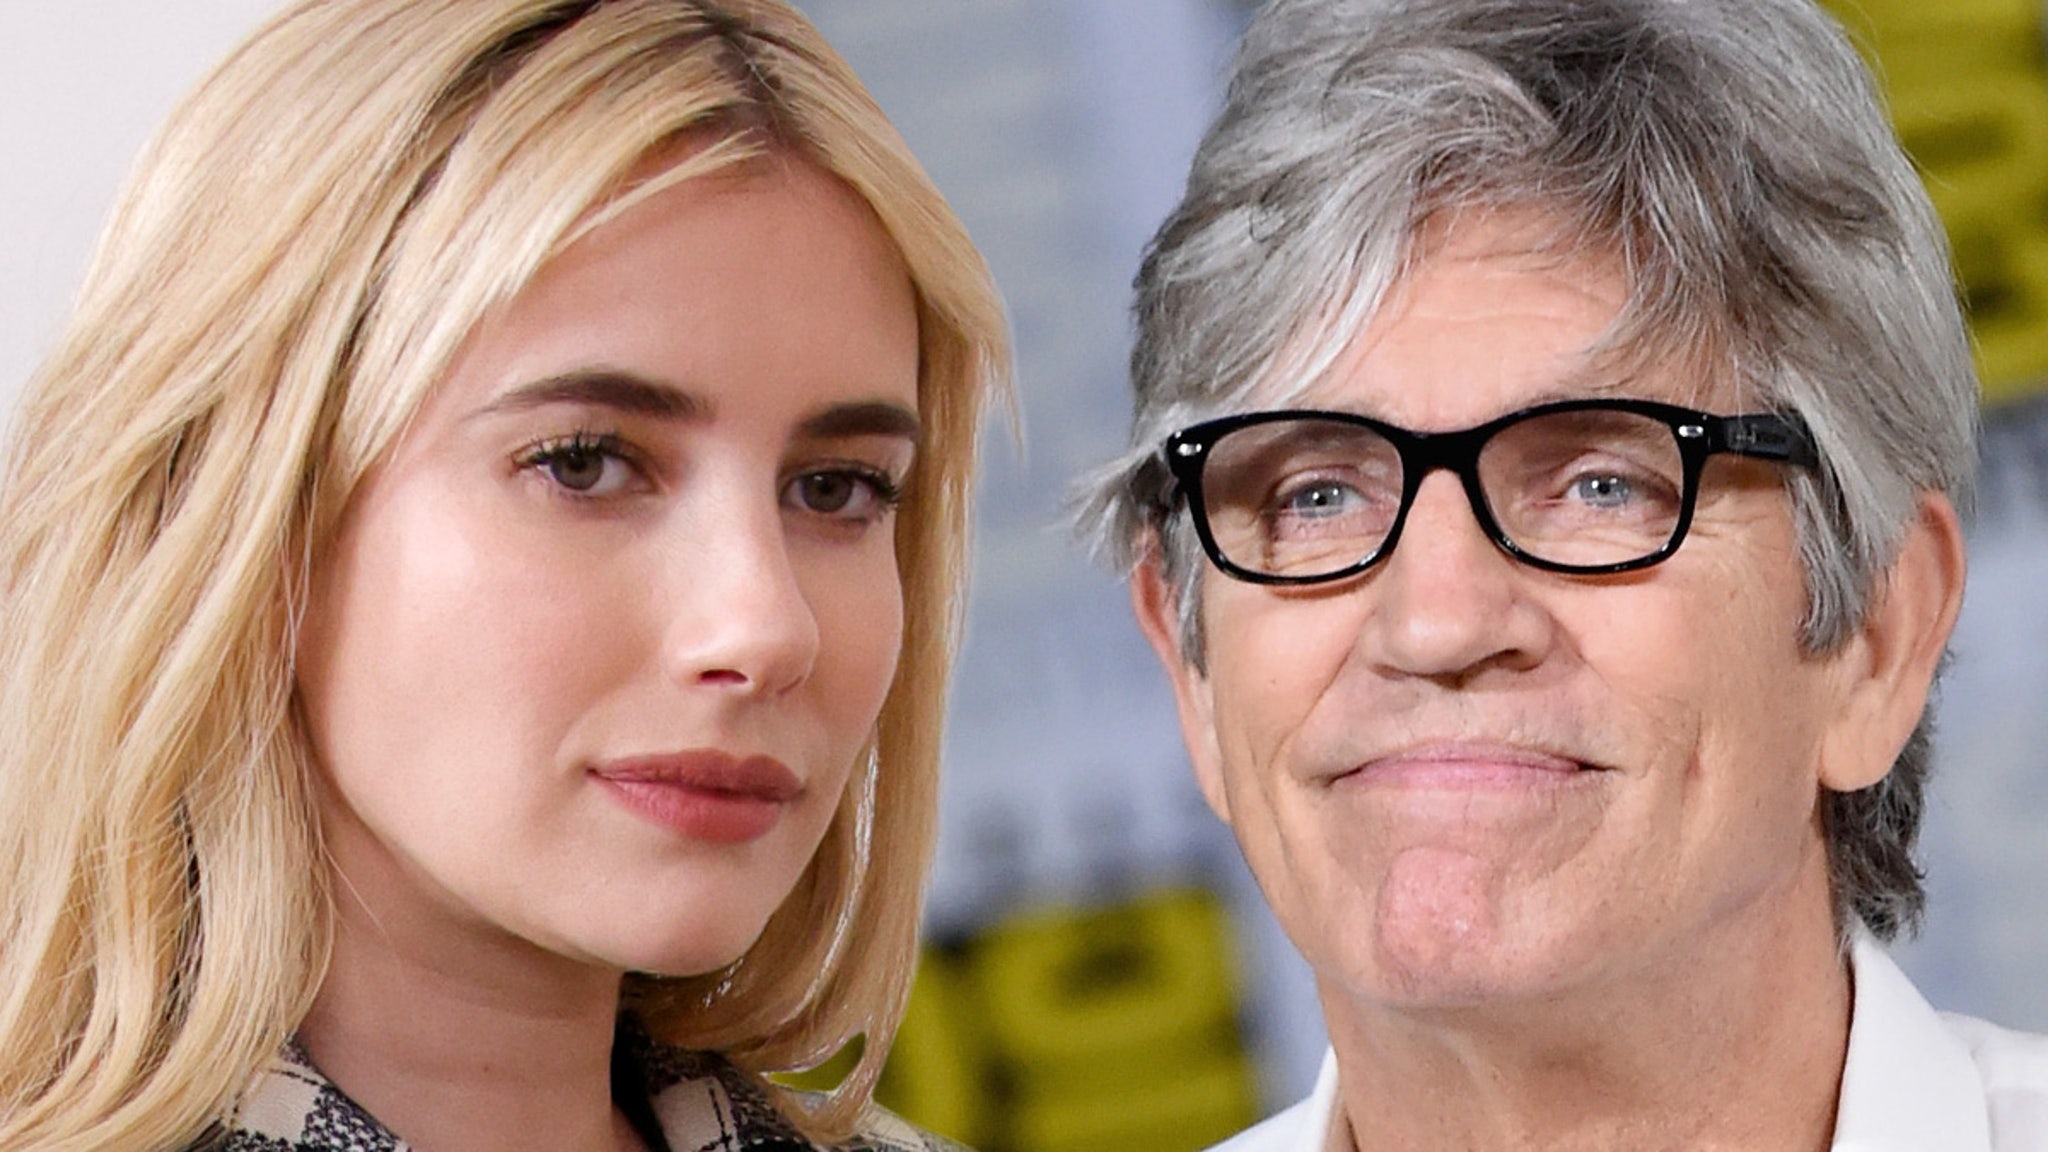 Emma Roberts Says She’s Never Gotten A Job Because of Nepotism